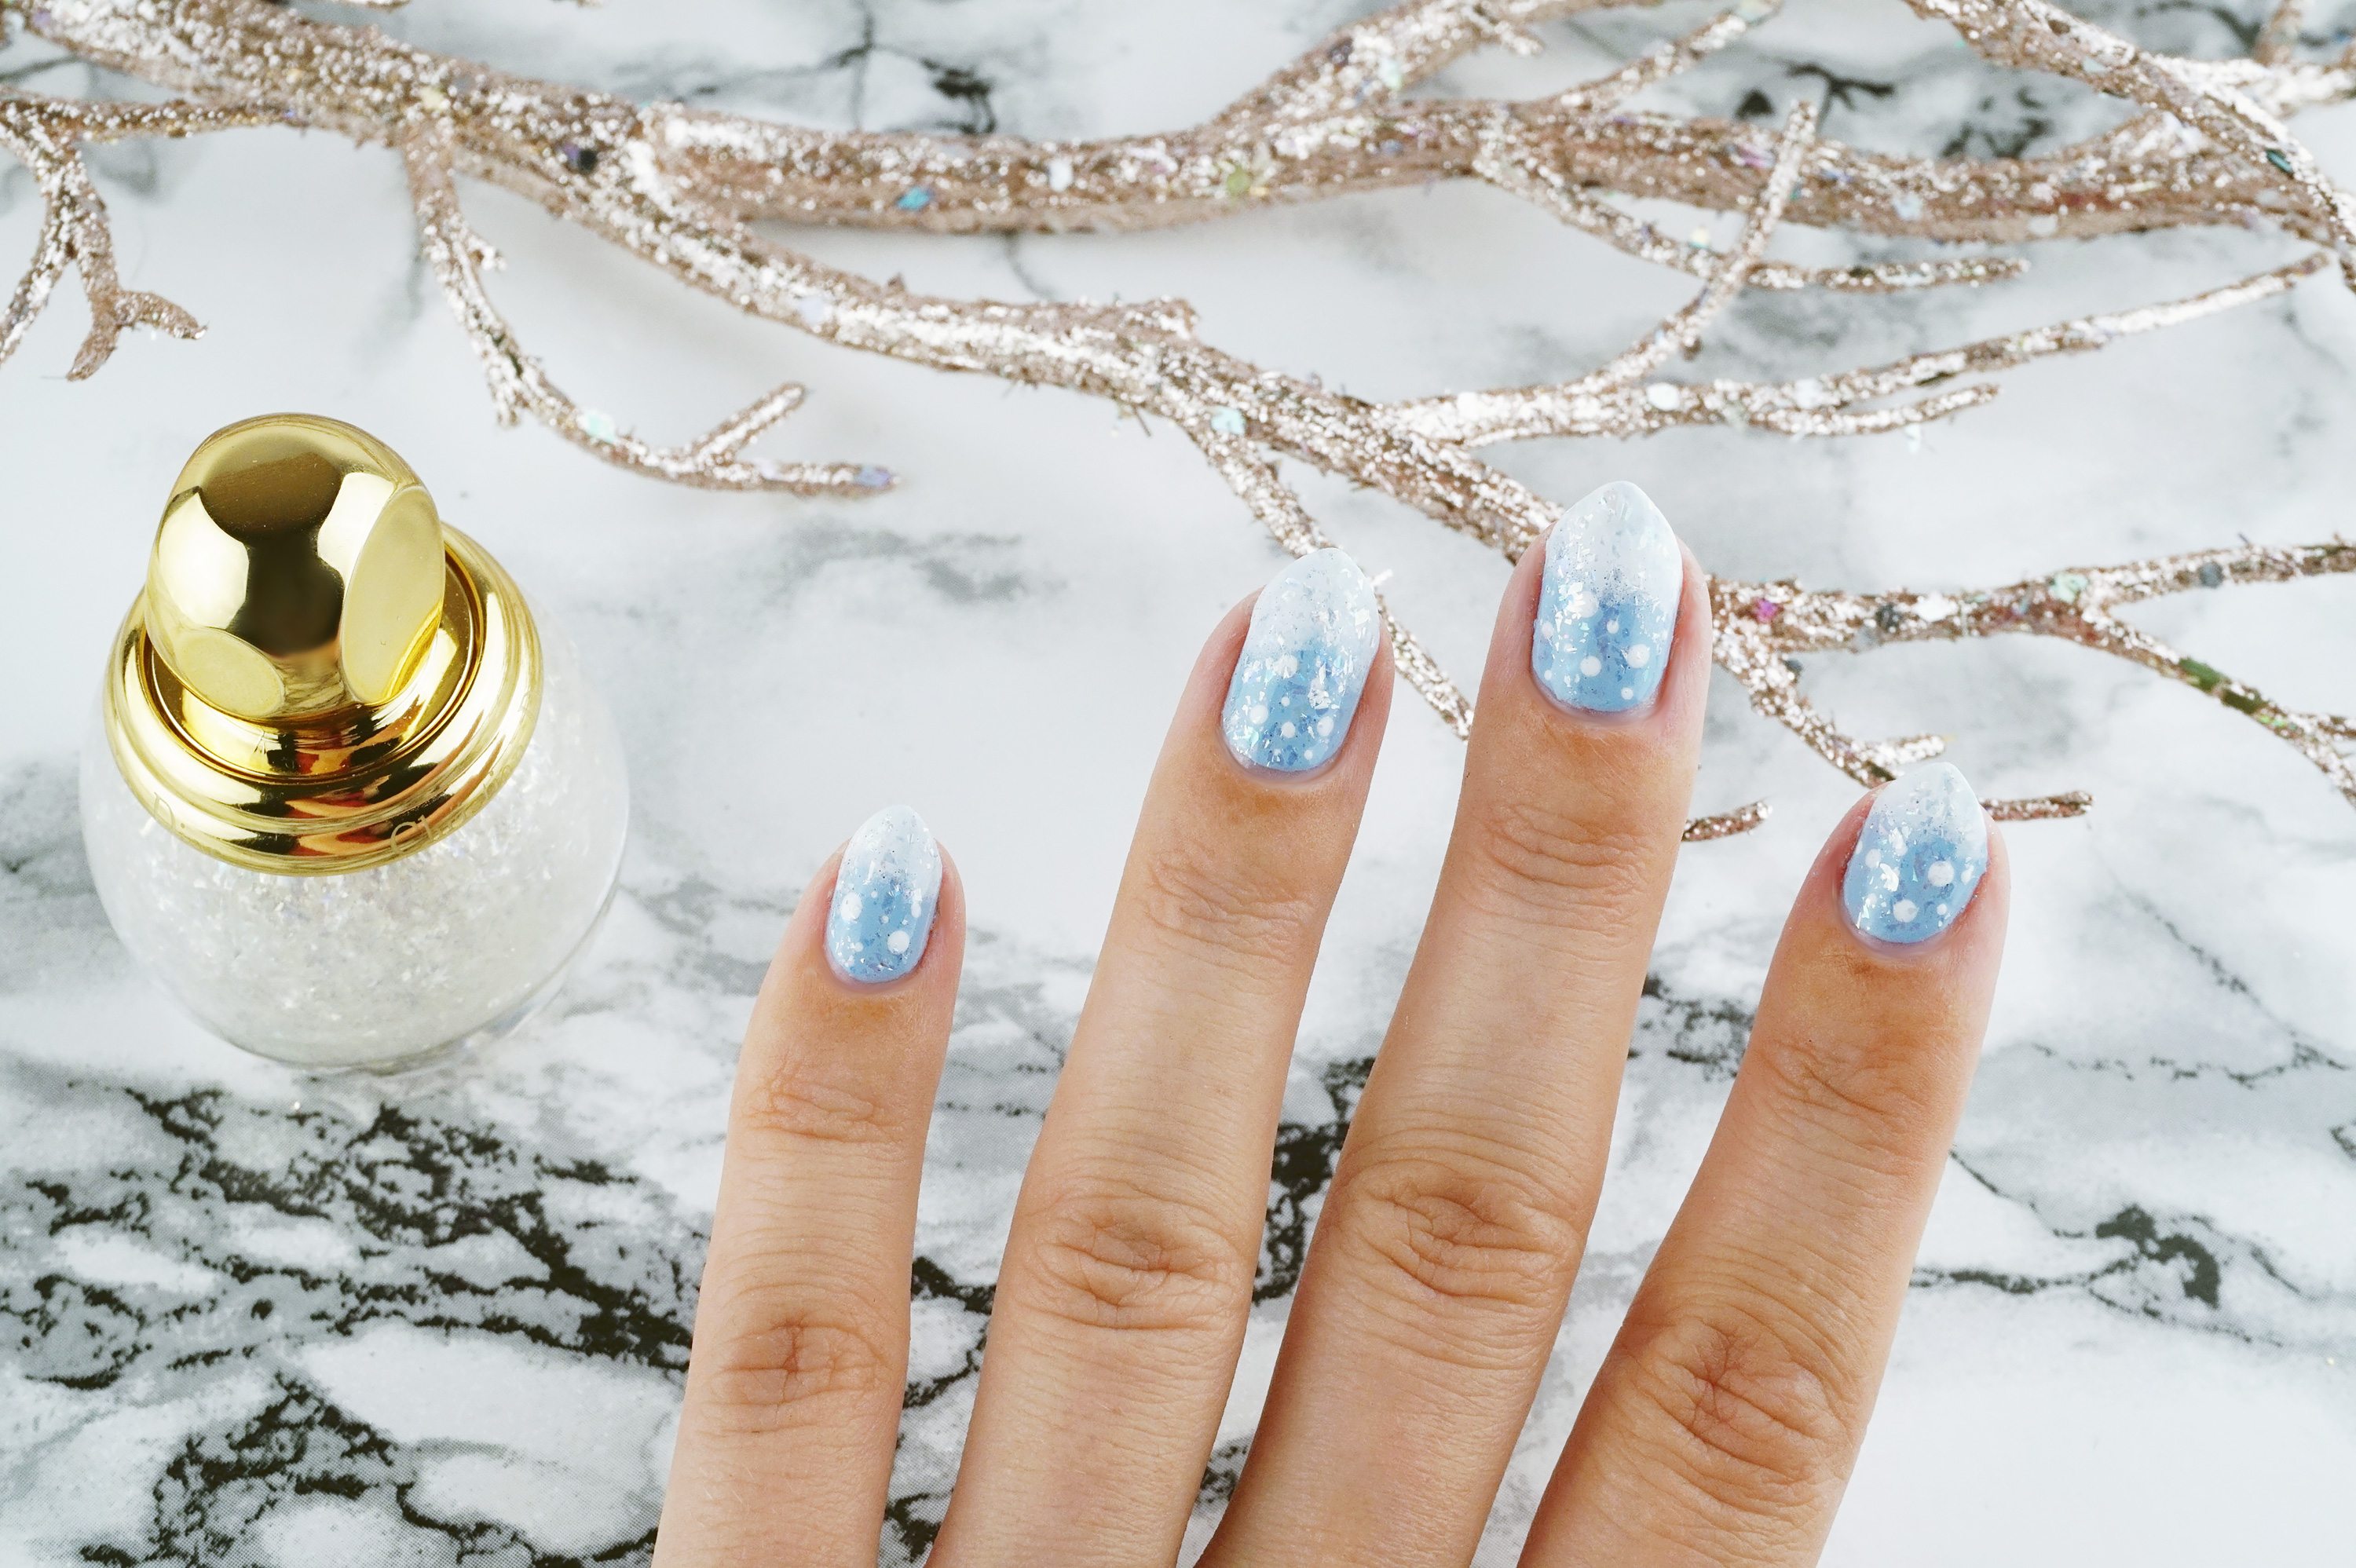 2. Festive Holiday Nail Art Ideas You Can Do Yourself - wide 1